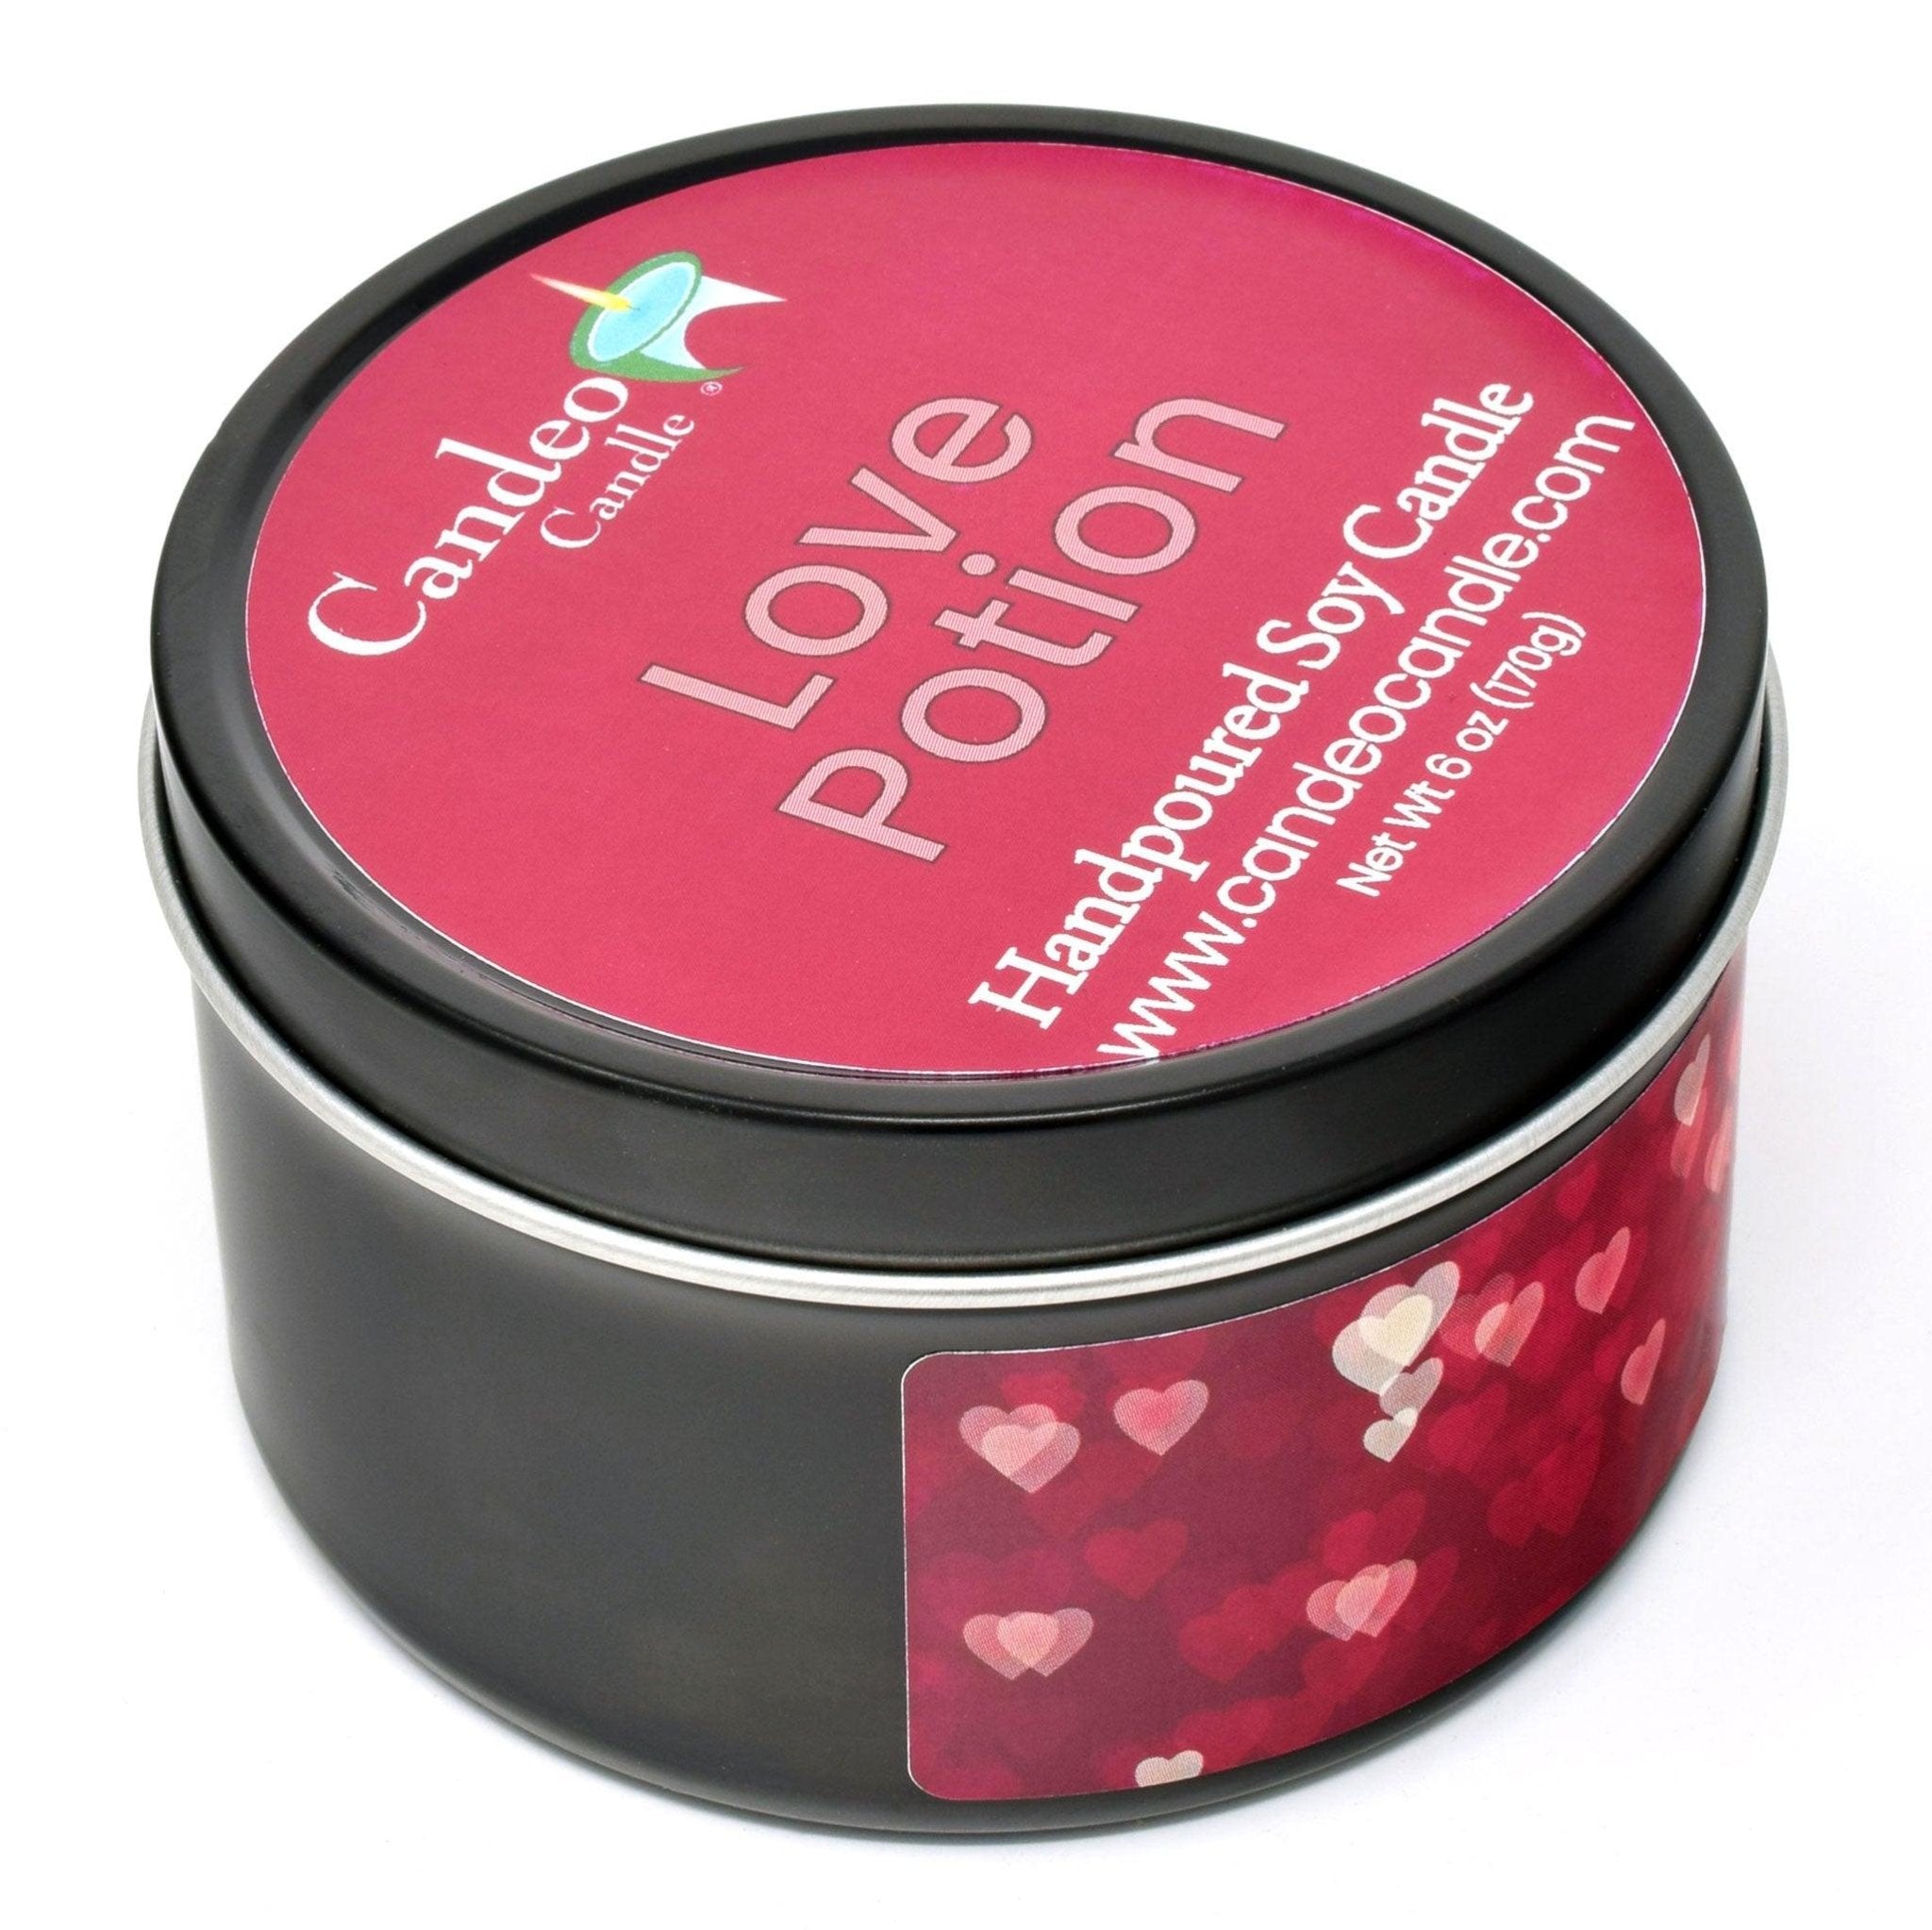 Love Potion, 6oz Soy Candle Tin - Candeo Candle